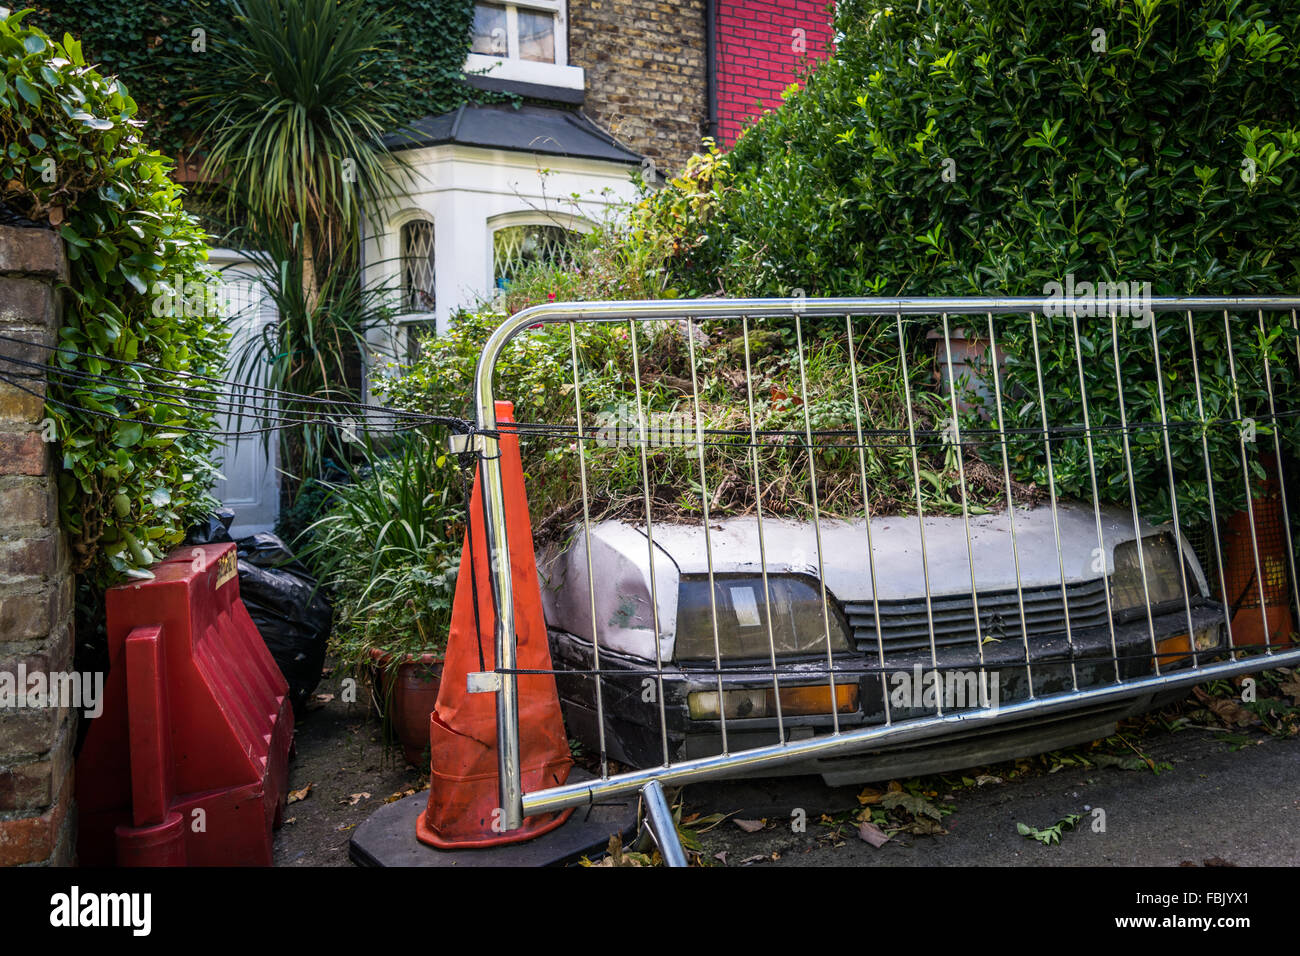 An abandoned car lays under a mountain of grass and refuge in a Dublin city front garden Stock Photo